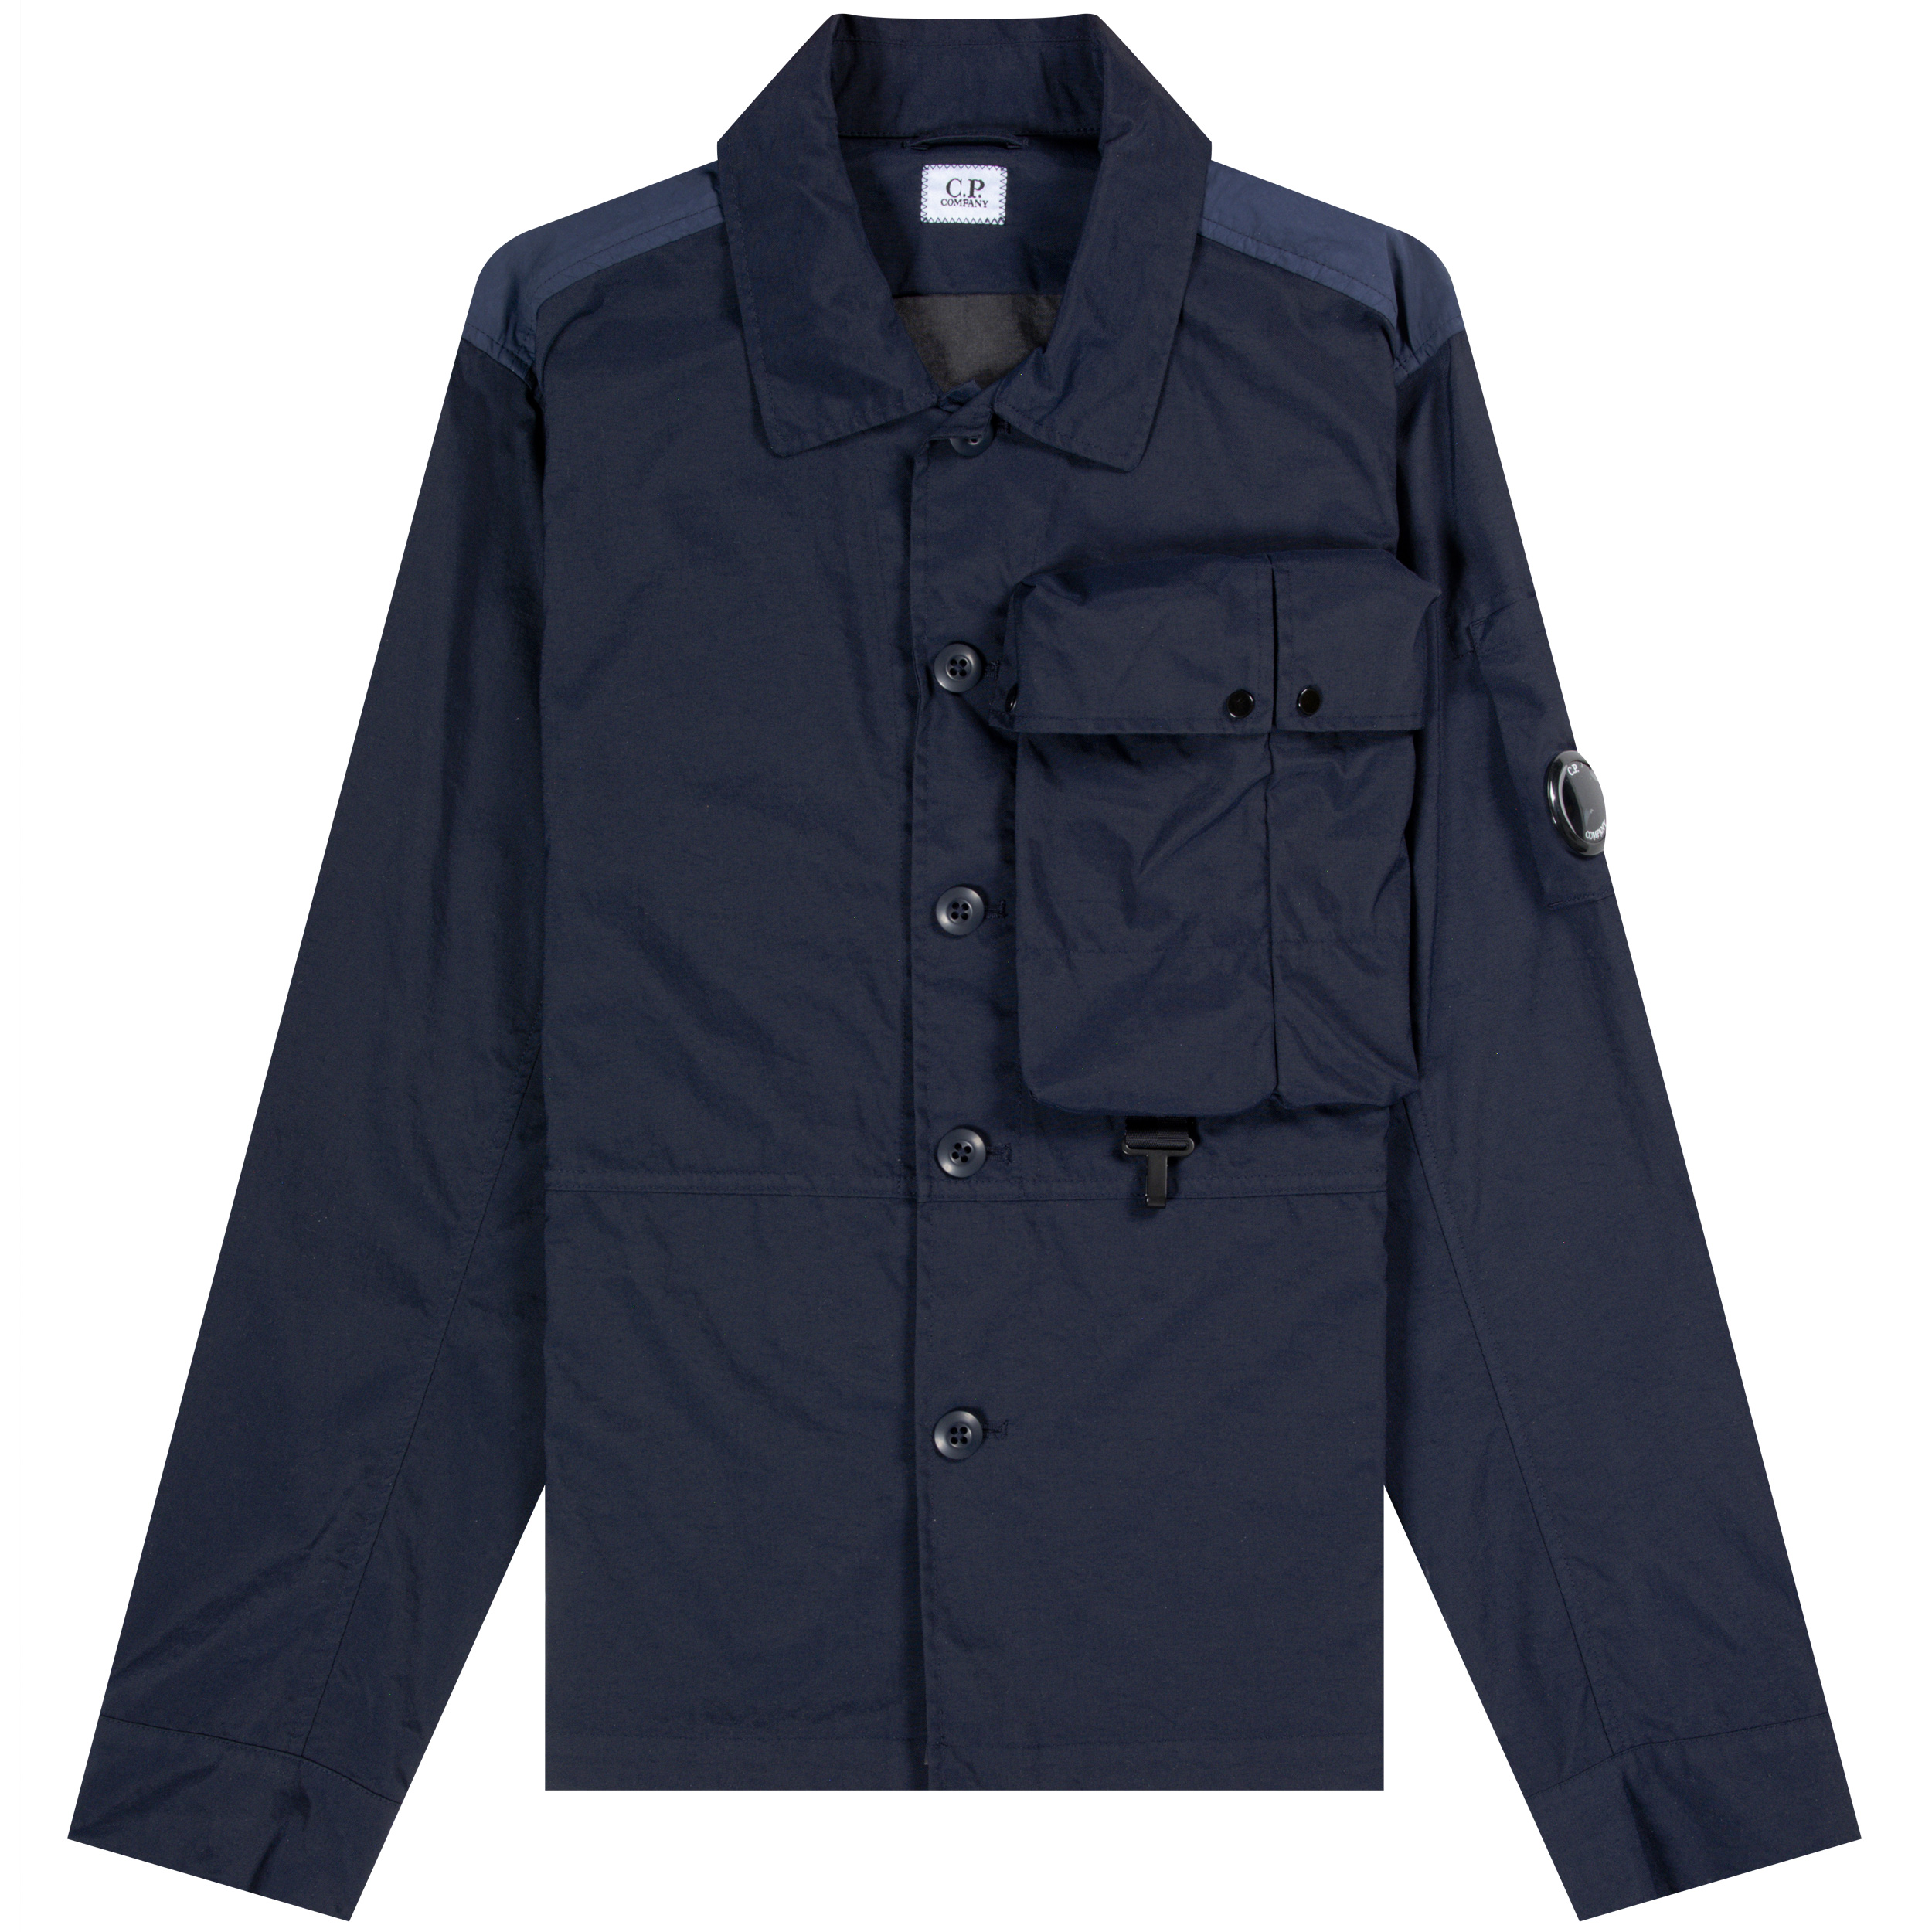 CP Company 'Taylon P' Full Button Overshirt Total Eclipse